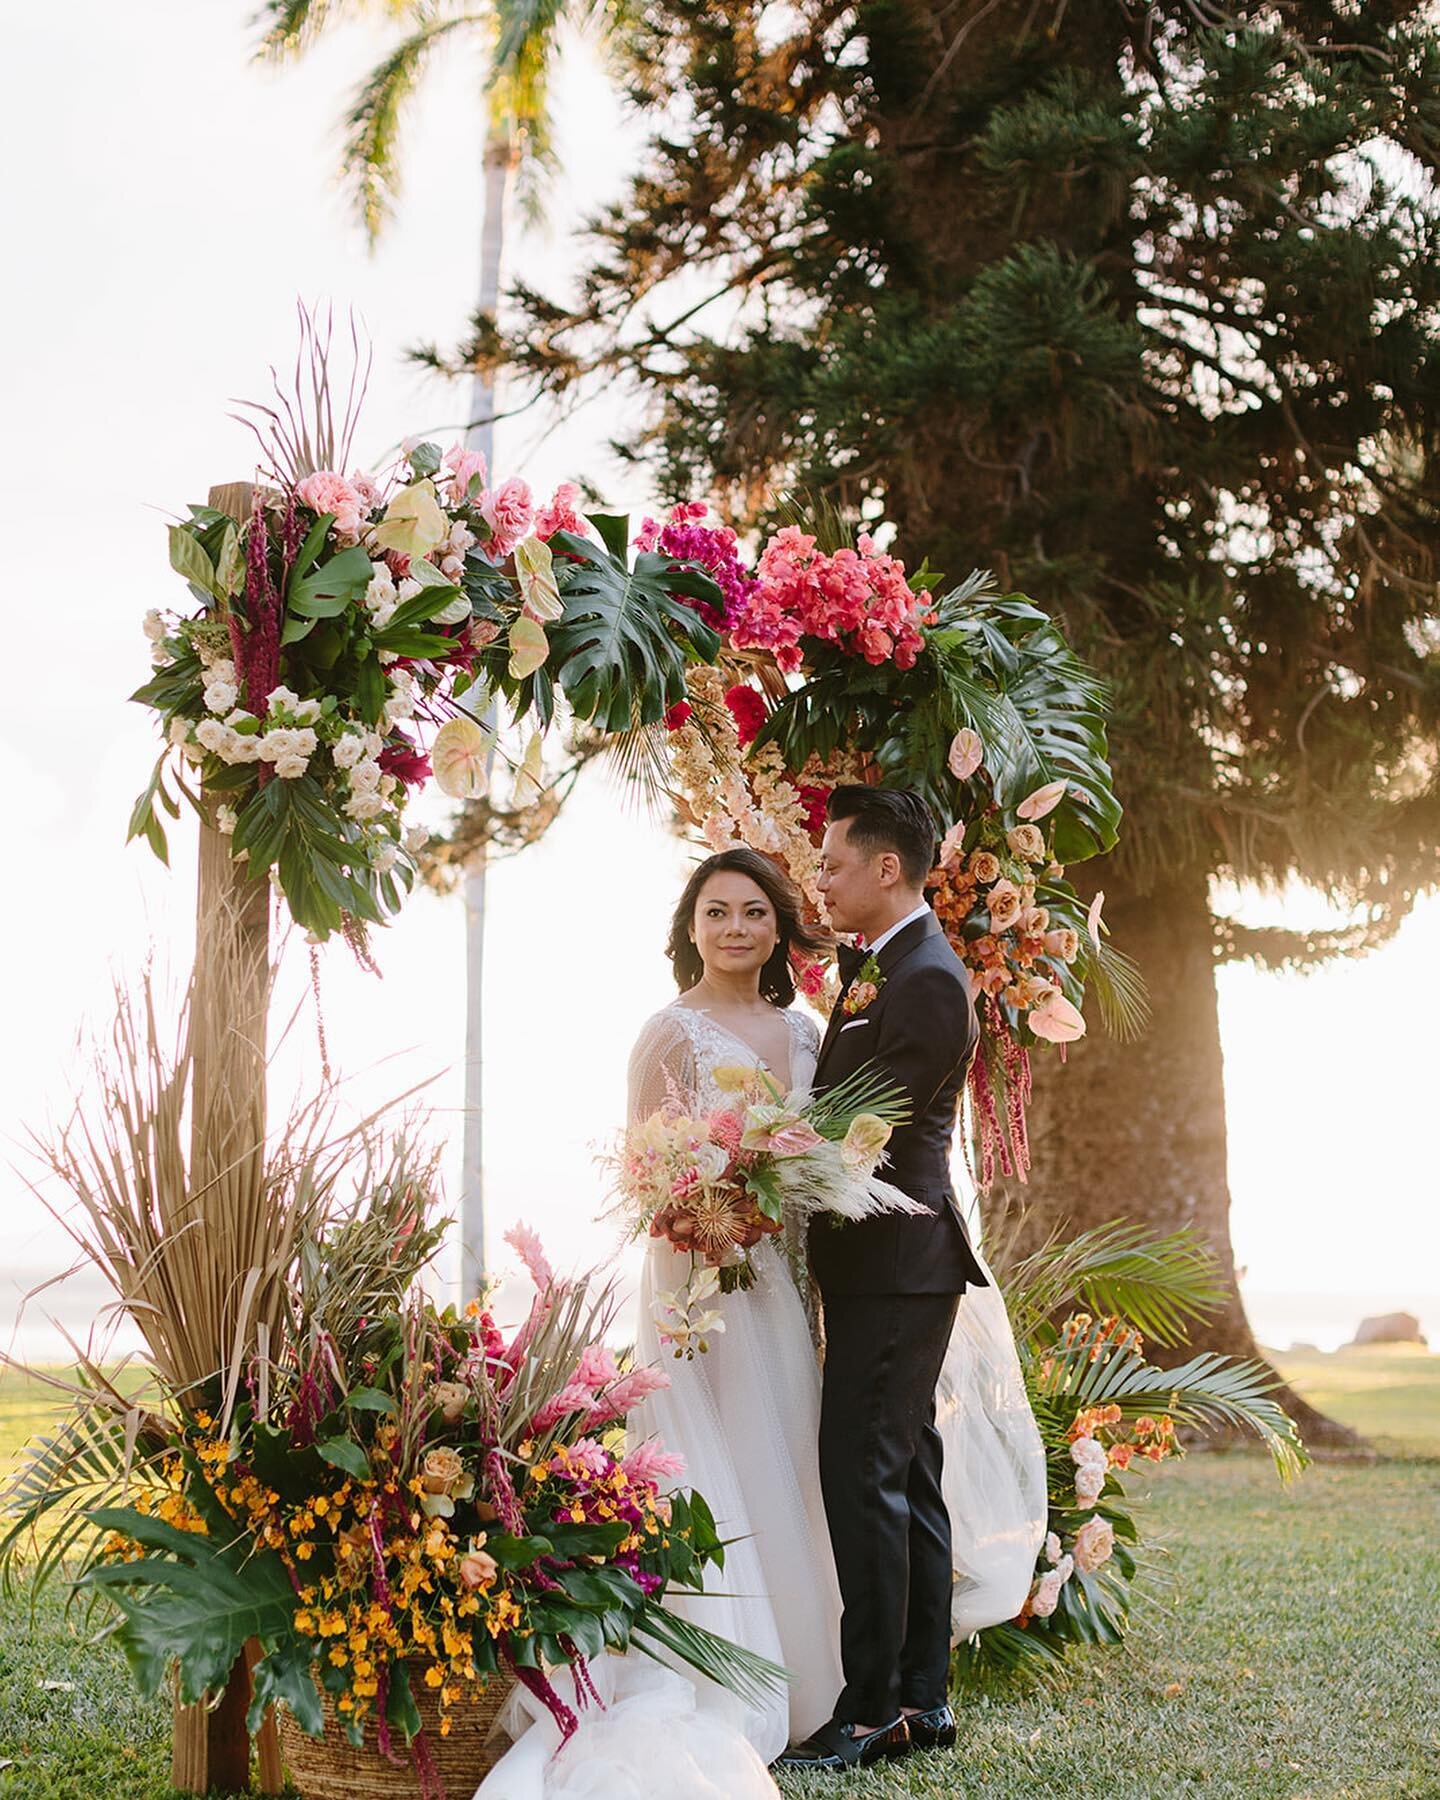 Scenes from the stunning wedding of Jewels &amp; Khang 

Planning &amp; Design : @coutureeventshawaii 
Photography :  @melialucida 
Venue: @theolowaluplantationhouse 

#mauiwedding #luxurywedding #hawaiiwedding #destinationwedding #mauidestinationwed